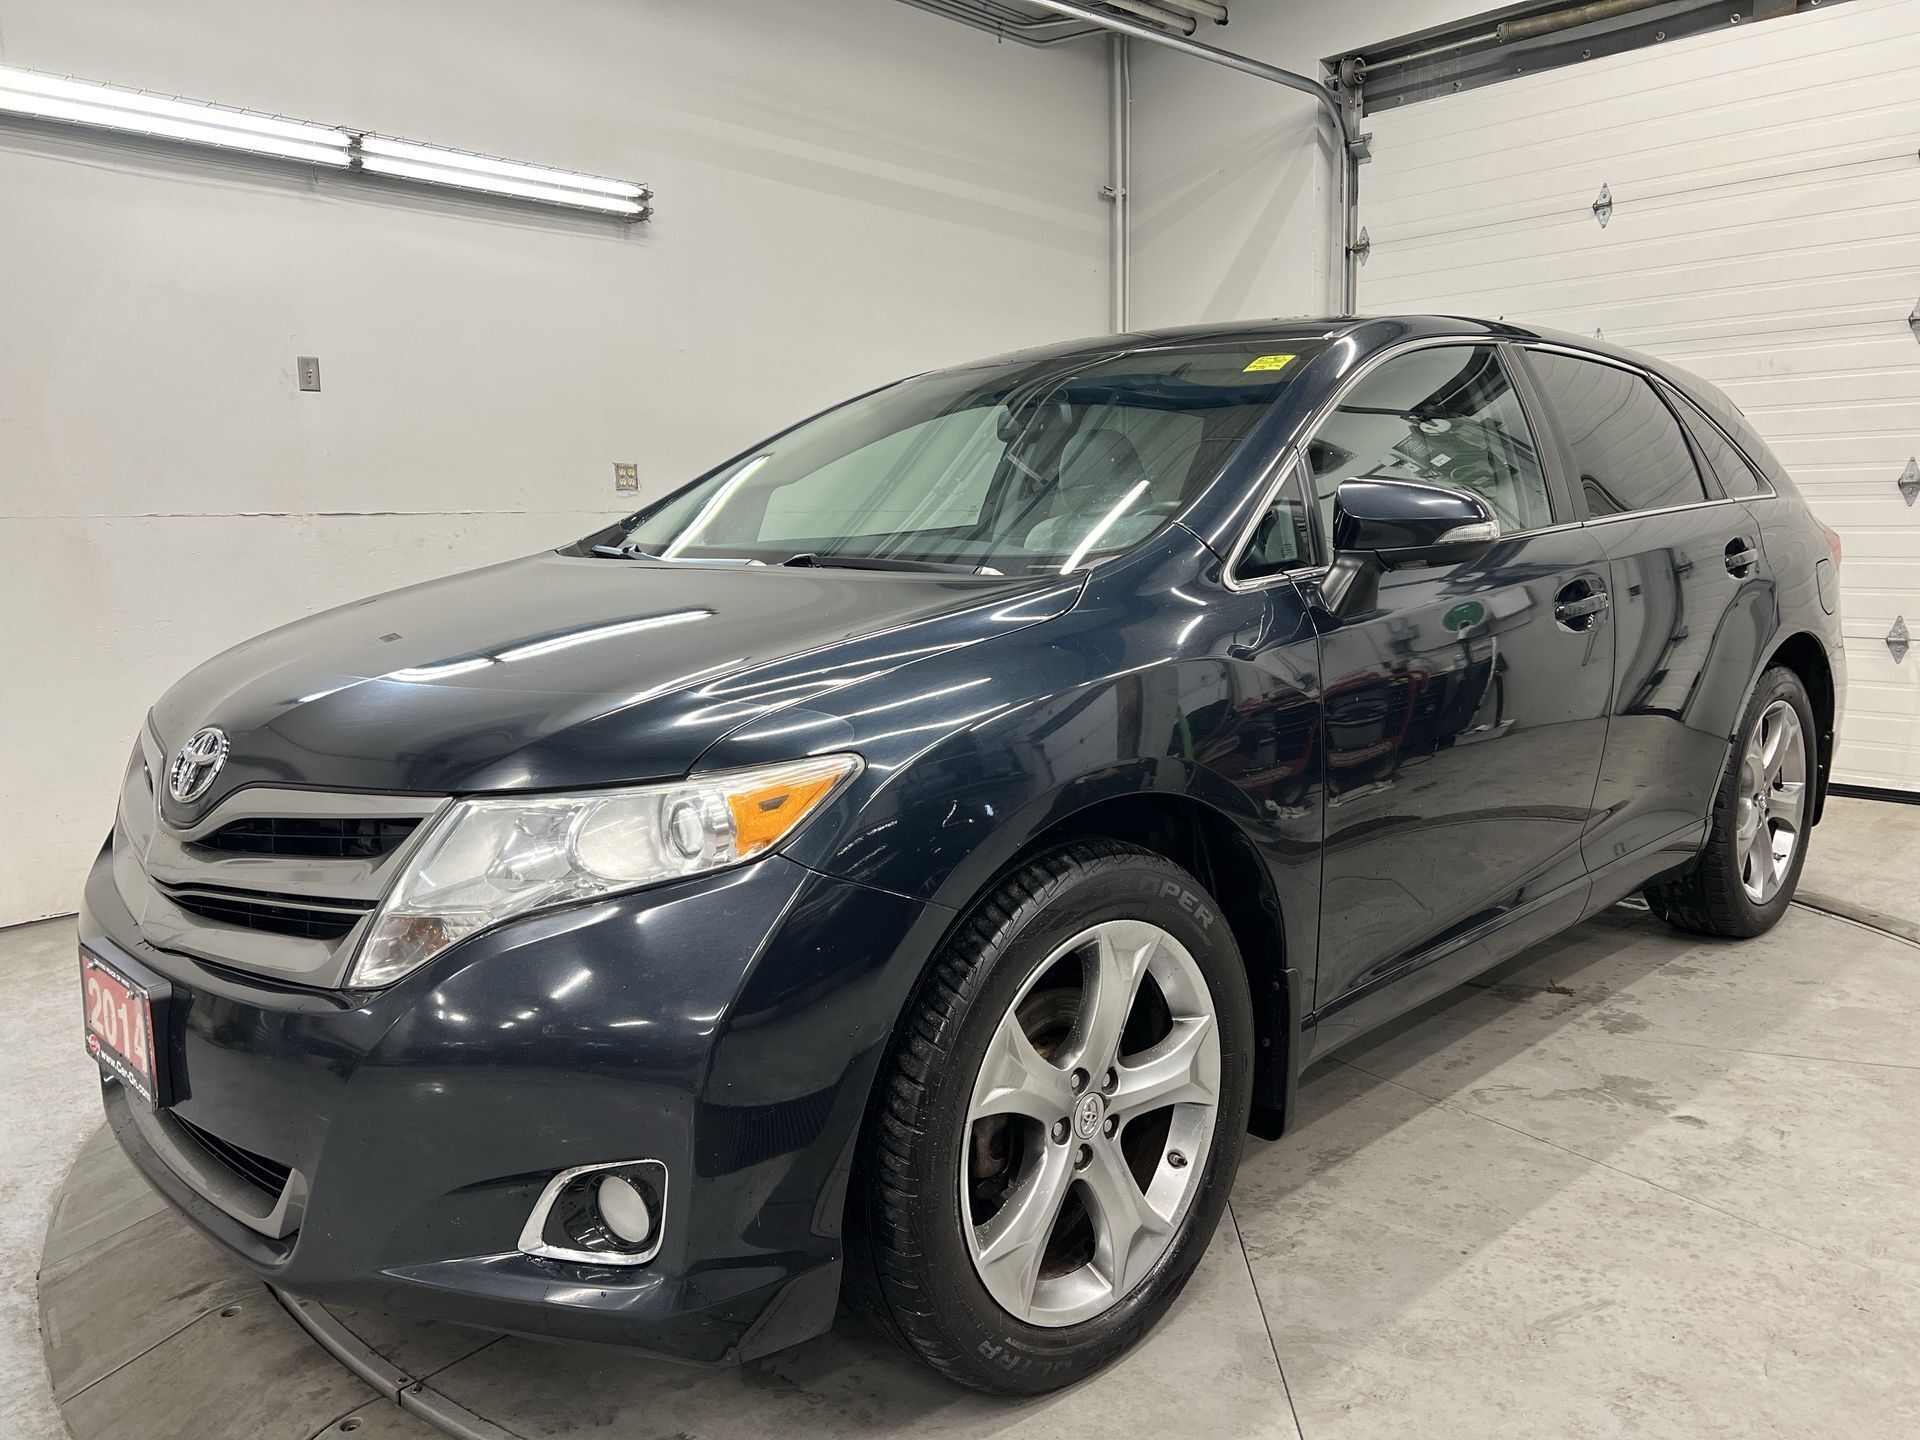 2014 Toyota Venza V6 AWD| LOW KMS! | PWR SEAT | DUAL-CLIMATE |ALLOYS